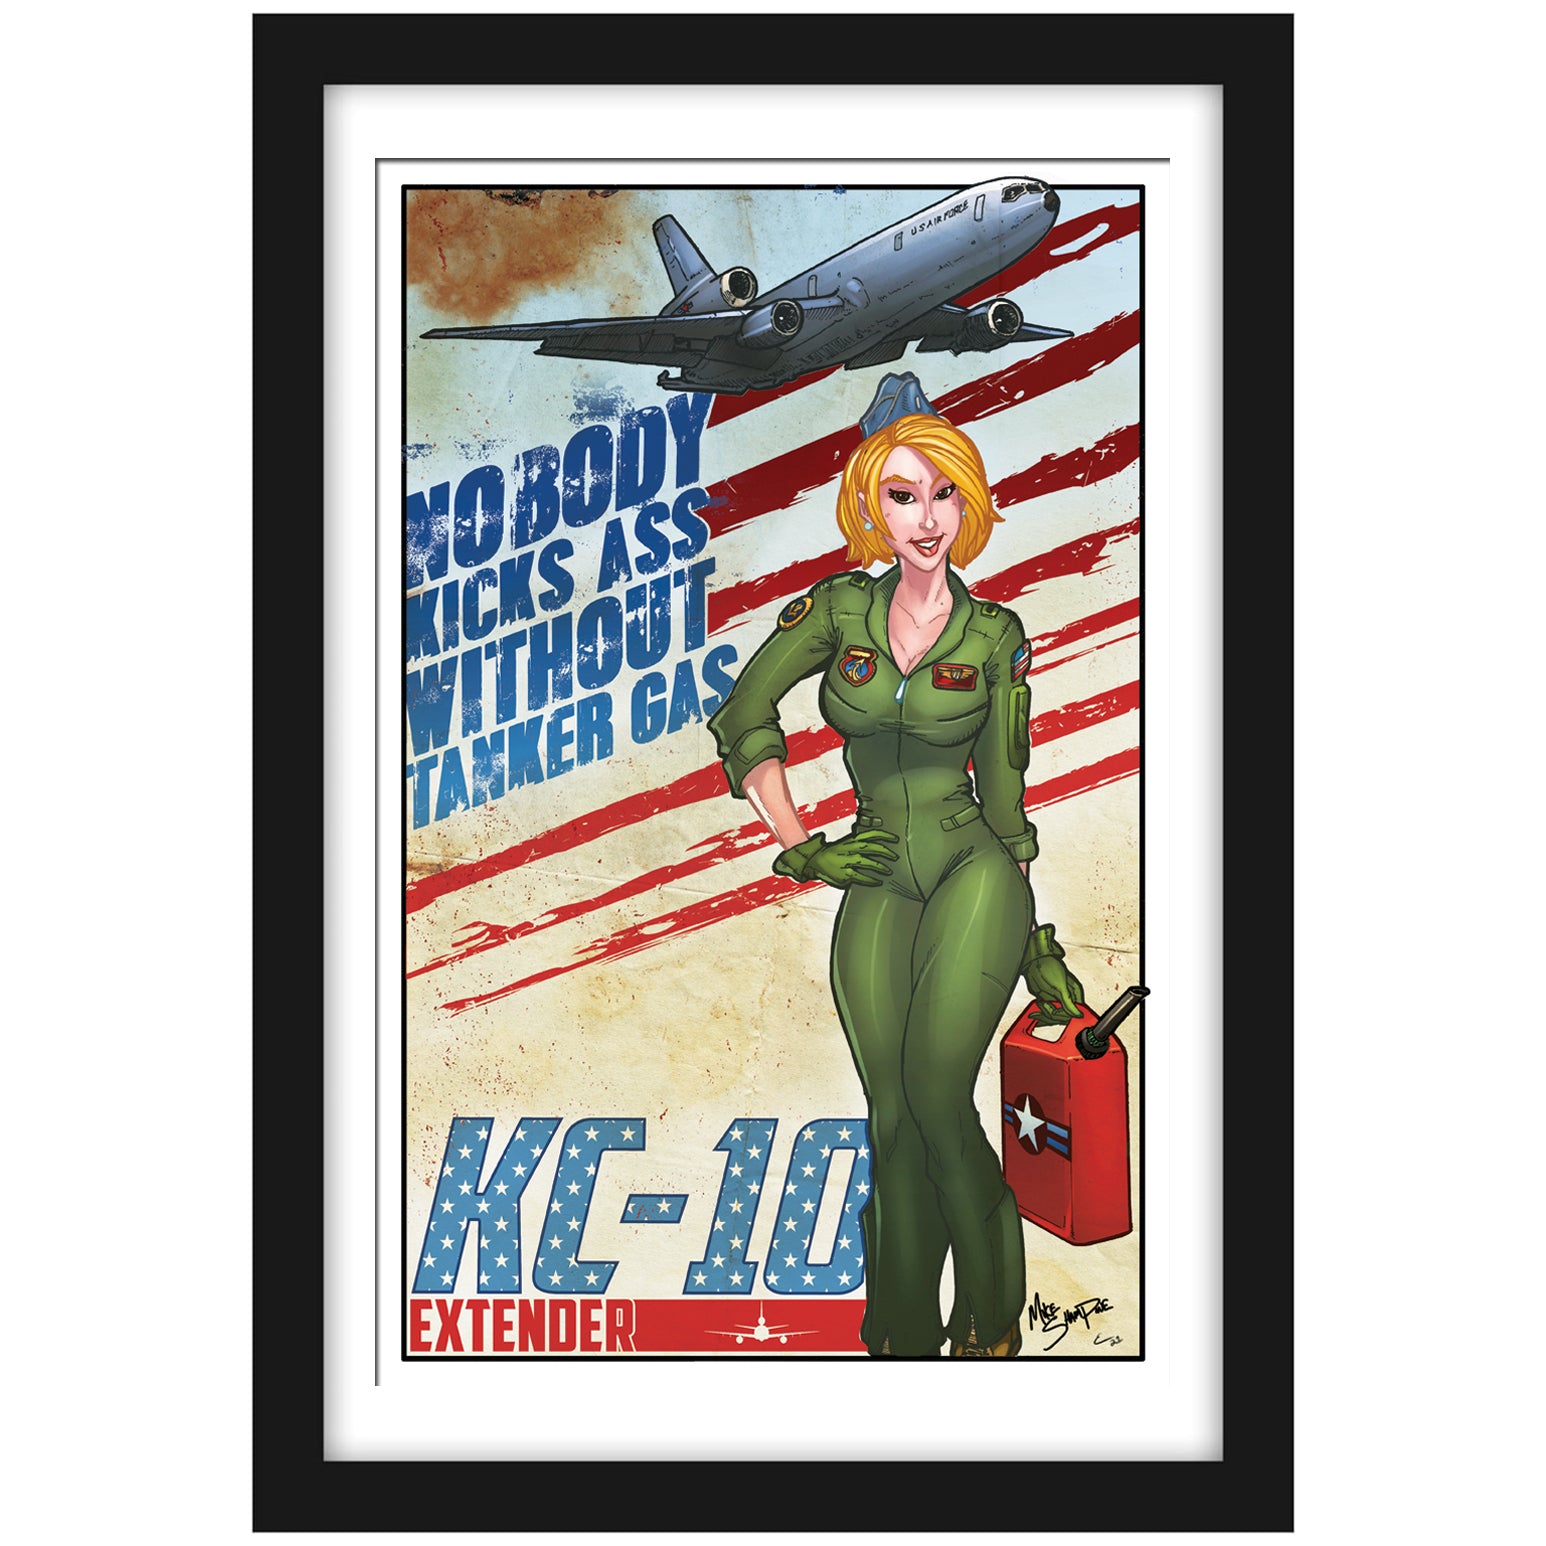 KC-10 "Tanker Gas" - Vintage Print Pinup & Airplane Art by Mike Shampine - Signed and Numbered